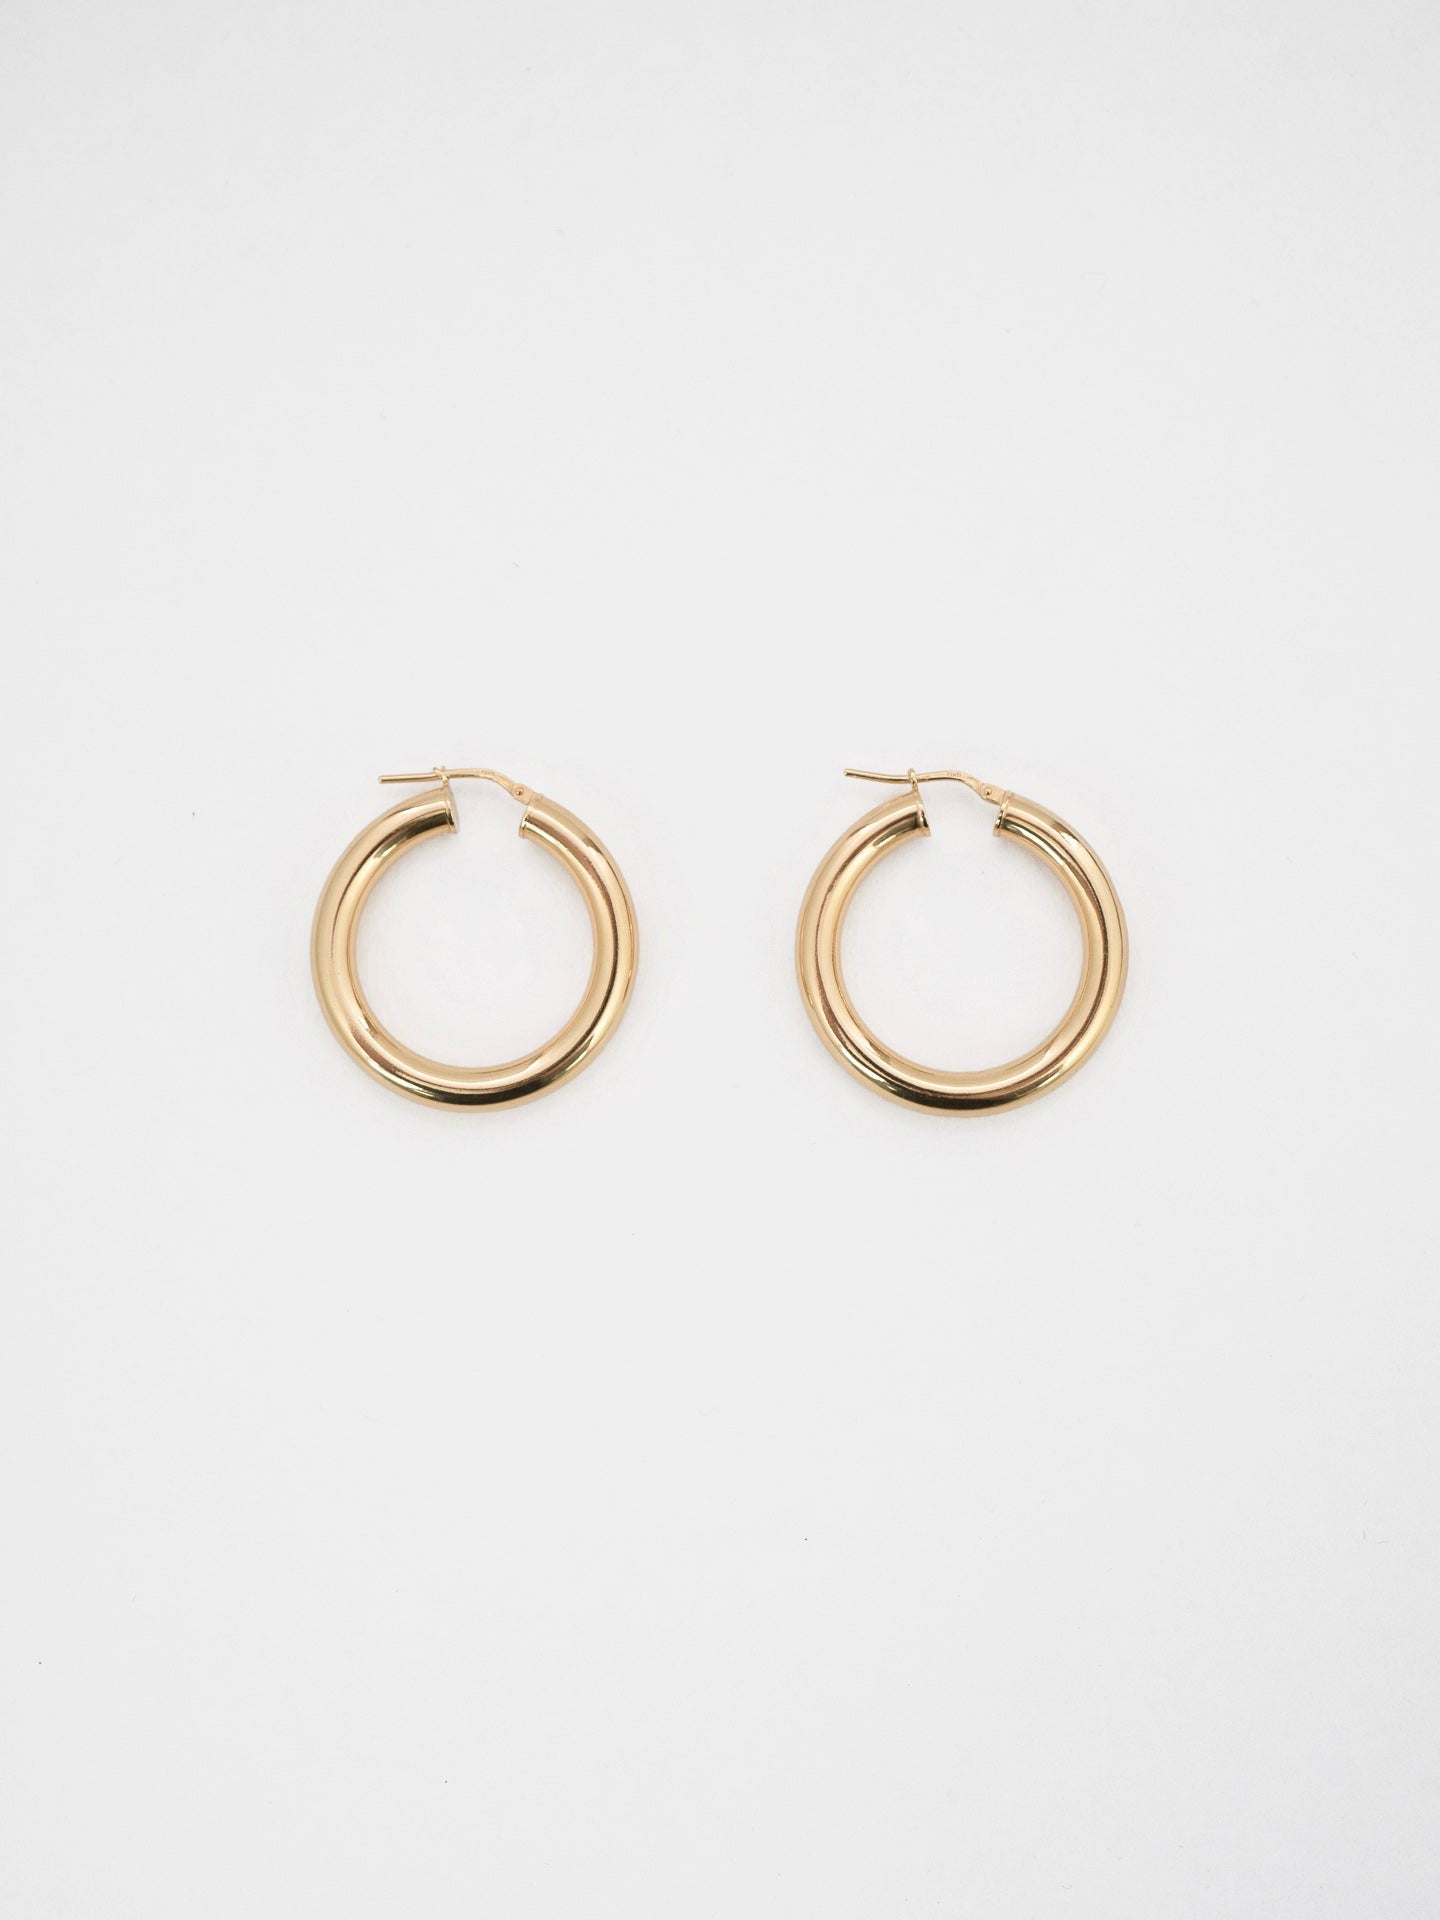 Chanel 1994 Oval Earrings Gold Small Ak38375D - 2 Pieces | Chairish